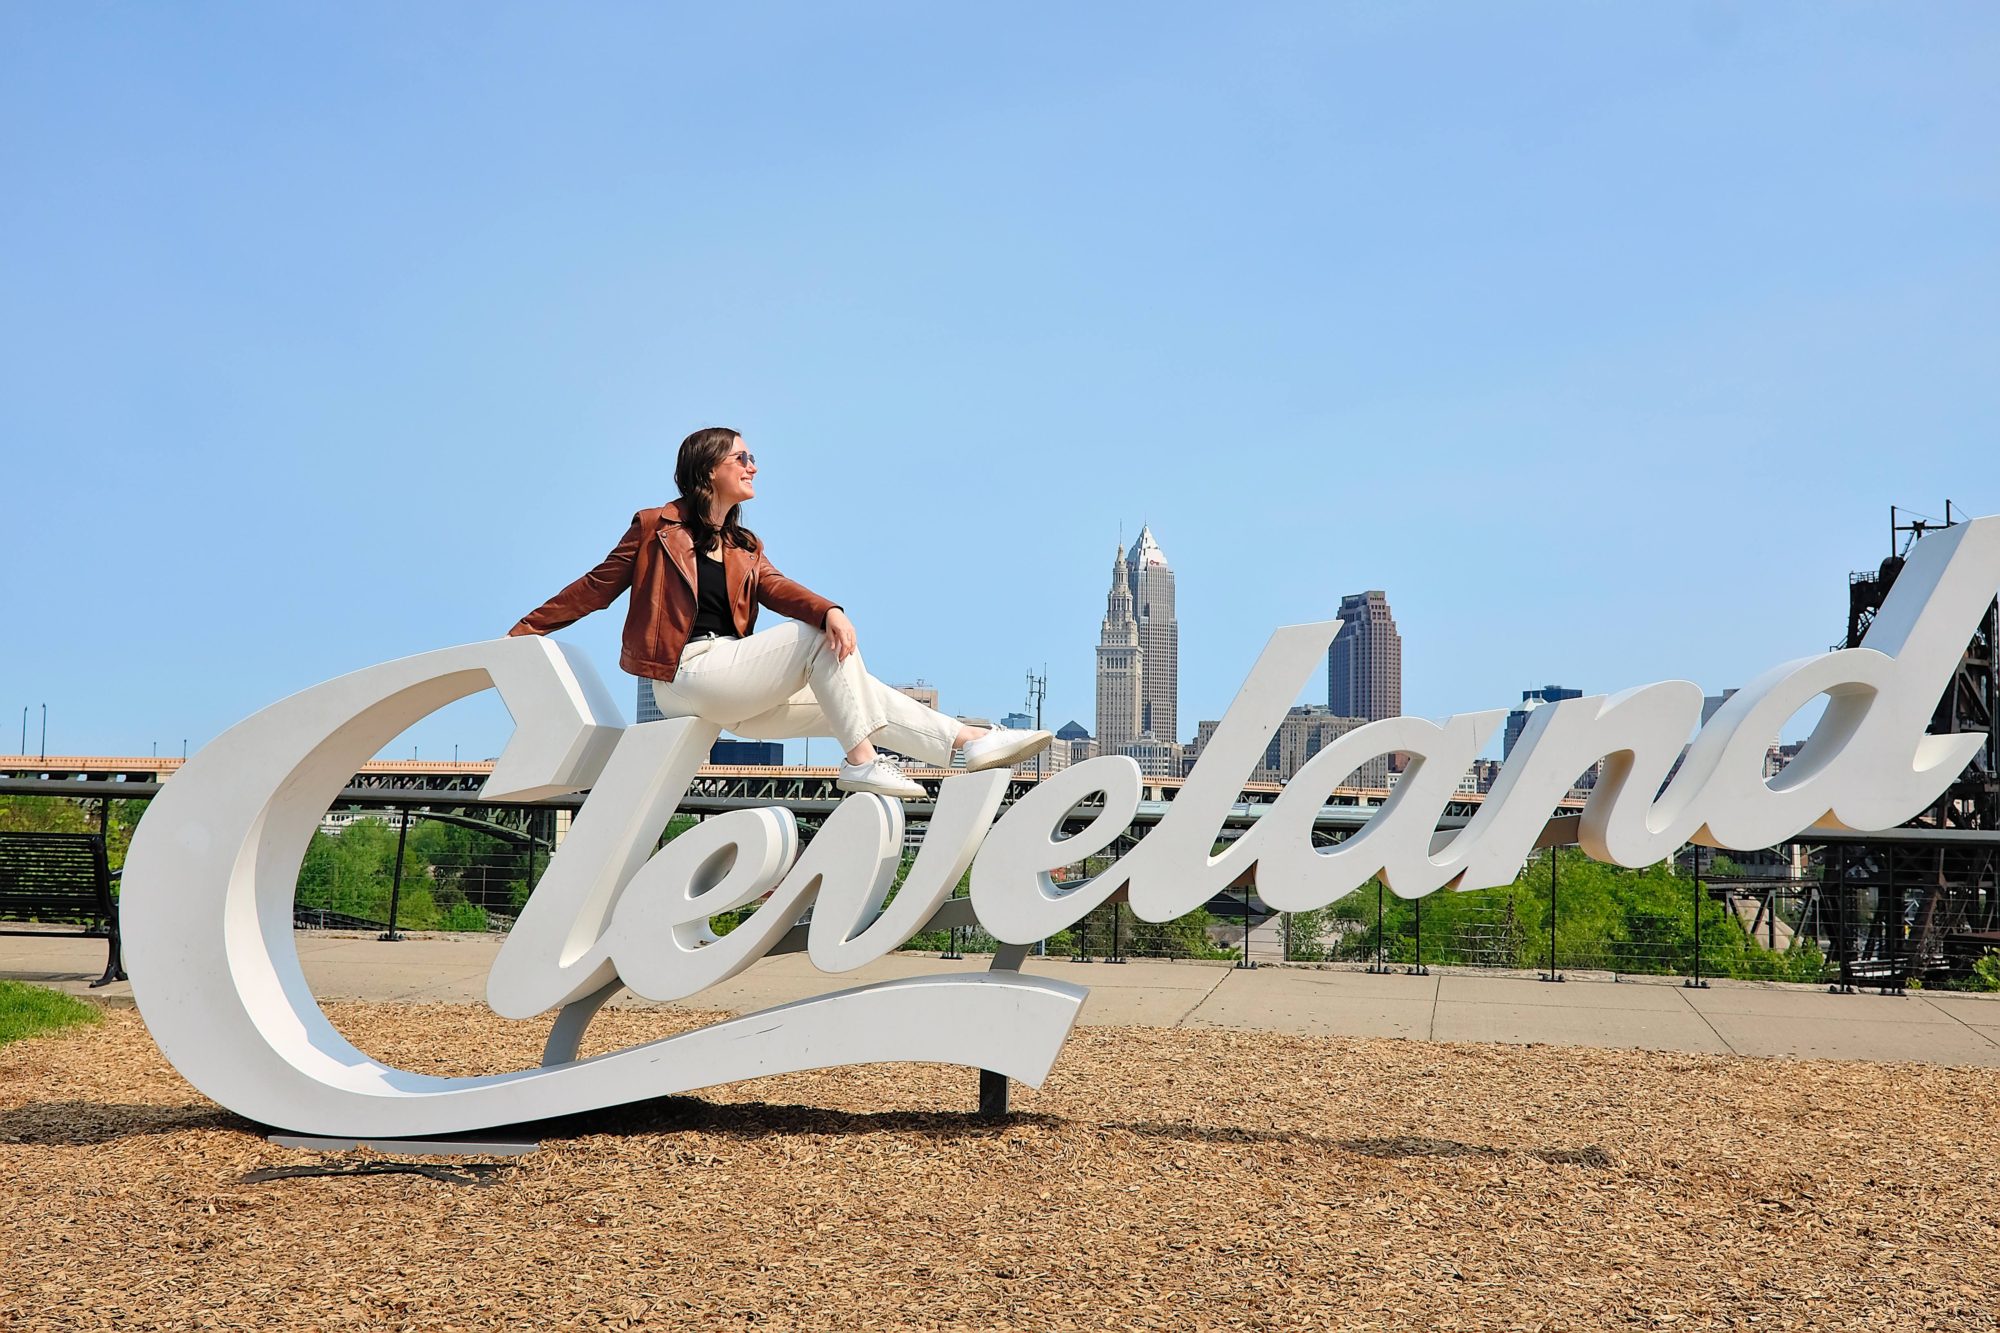 65+ Free Things to Do in Cleveland Ohio - Travel Inspired Living